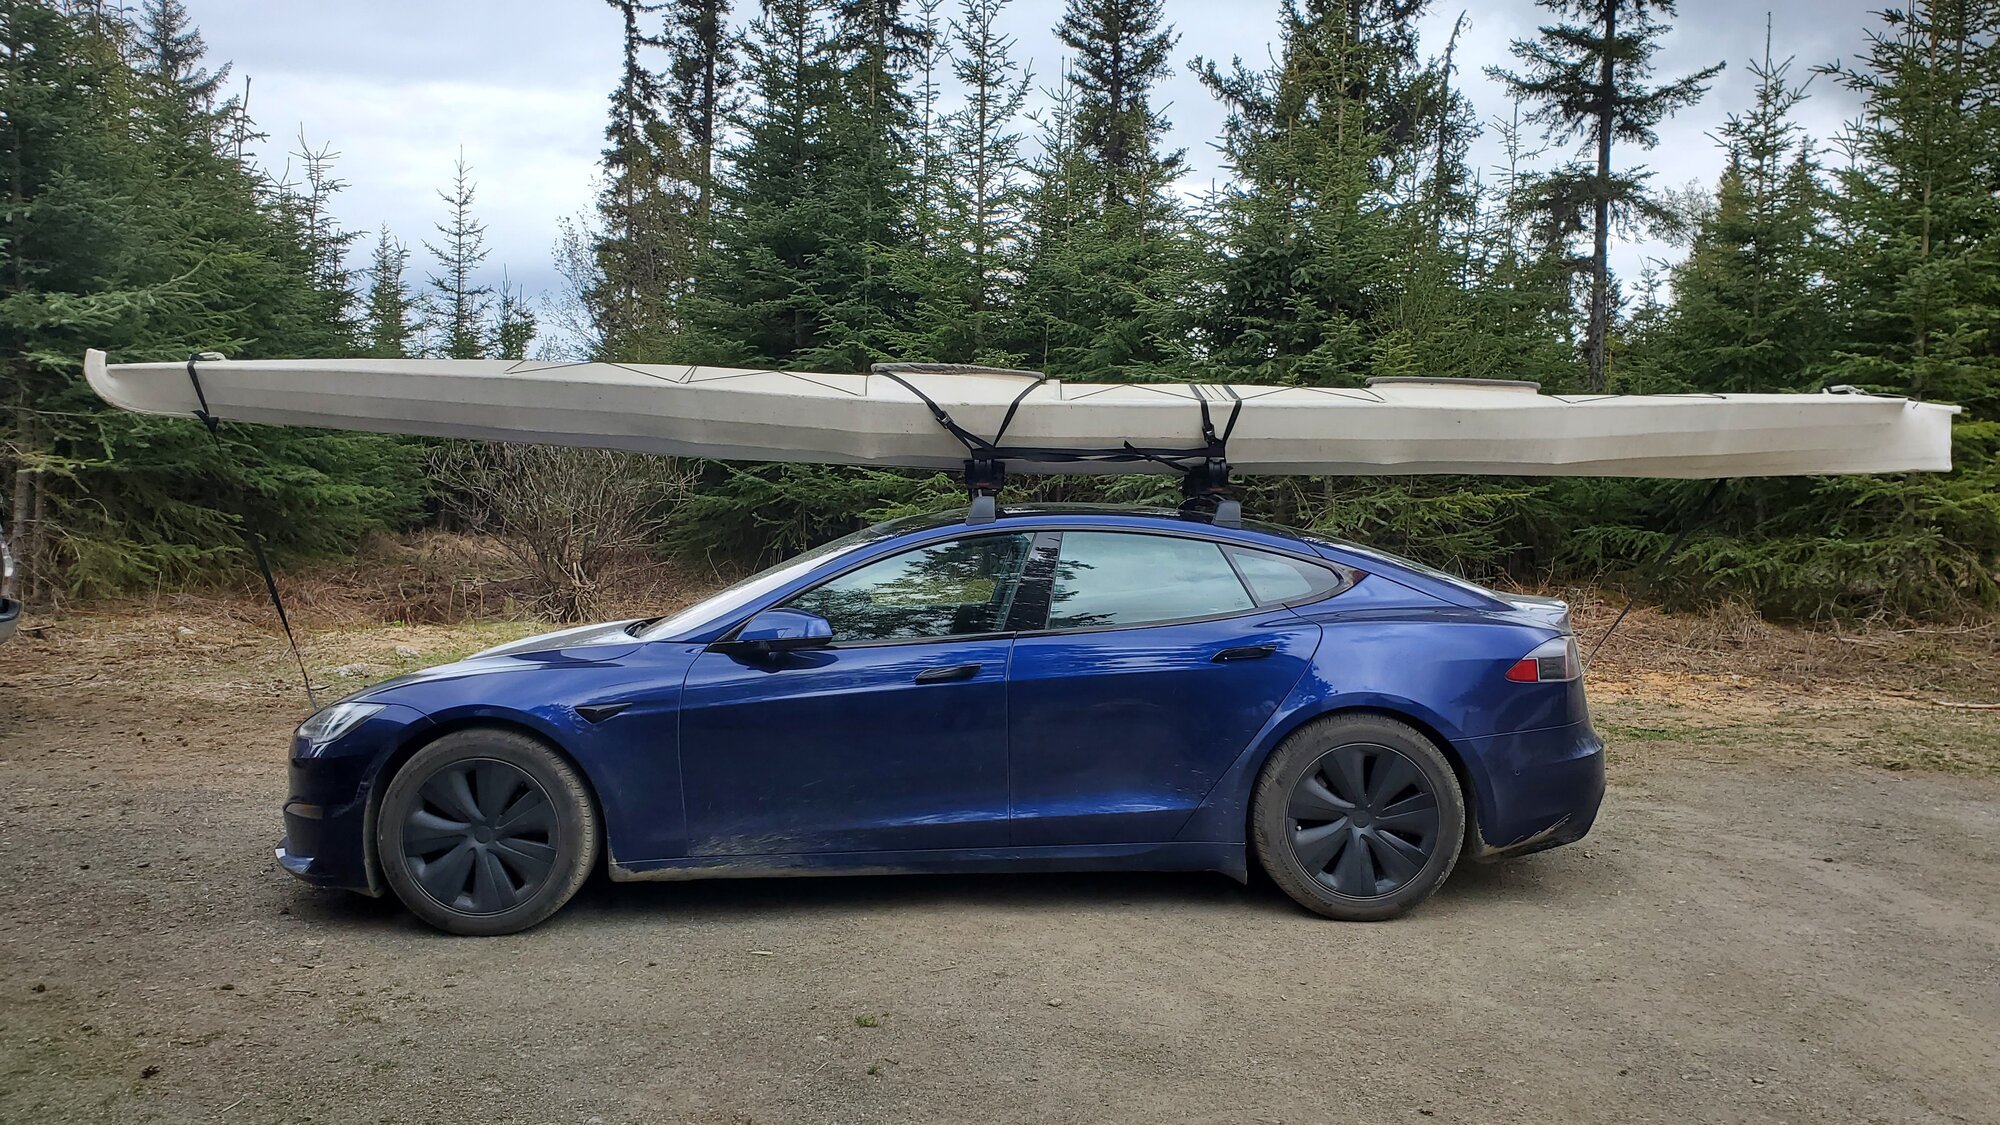 Model Y 2023: What is your solution for Roof Rack and Roof Cargo Box? |  Tesla Motors Club